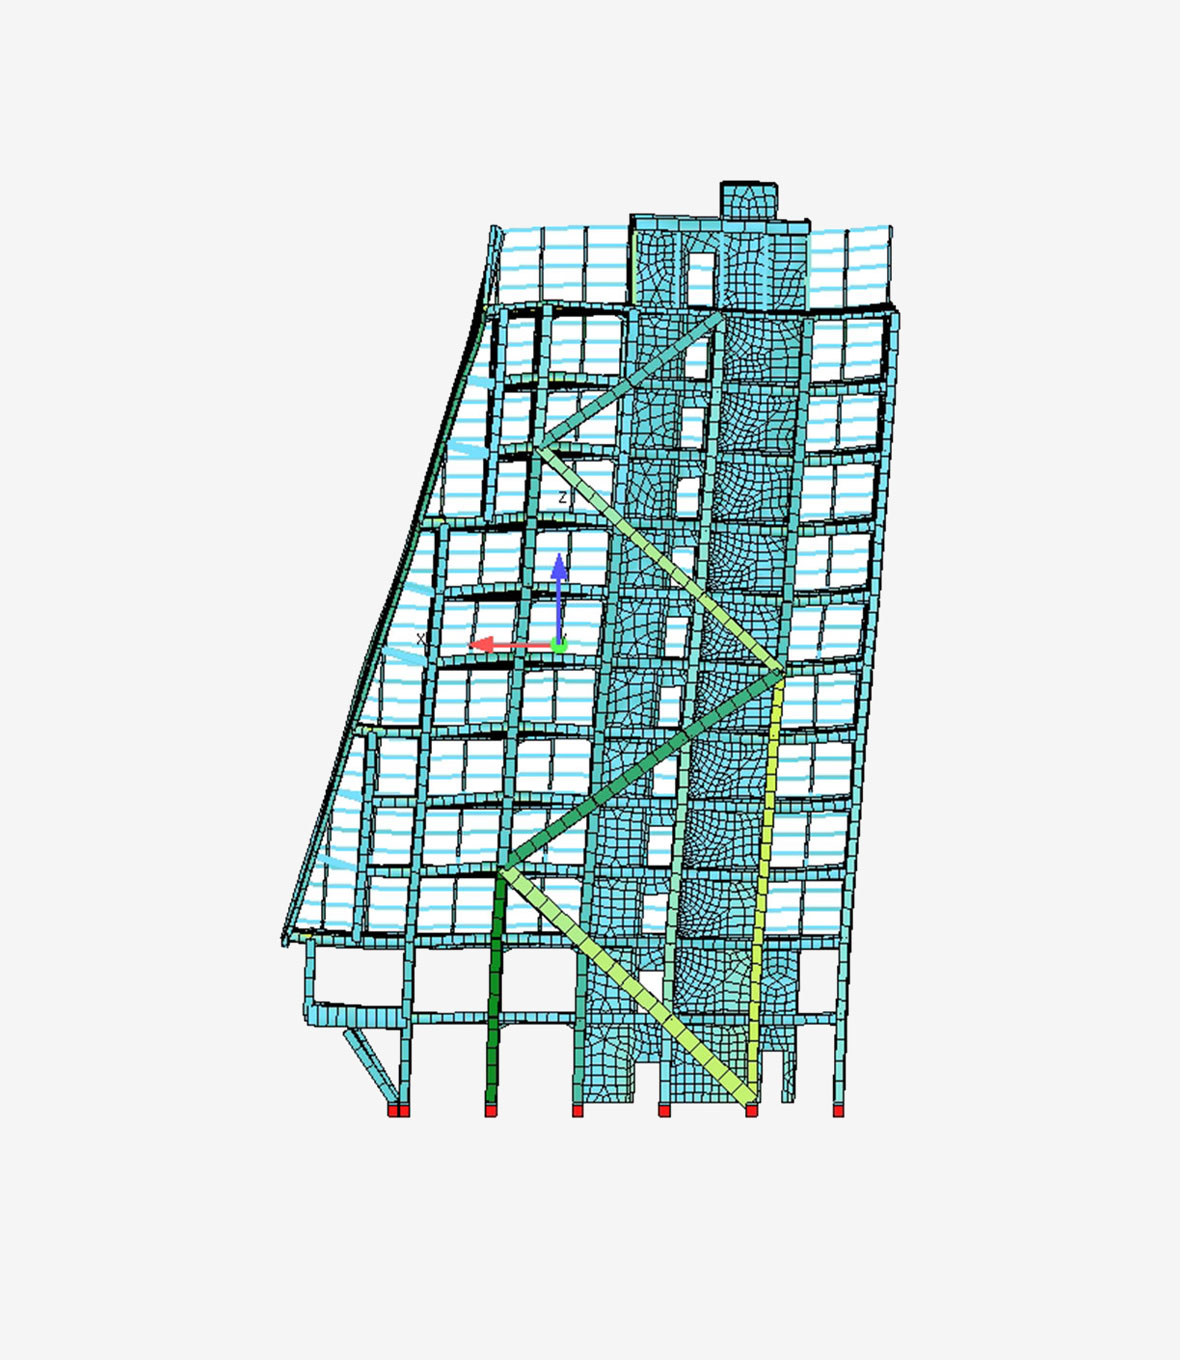 Structural design and structural planning